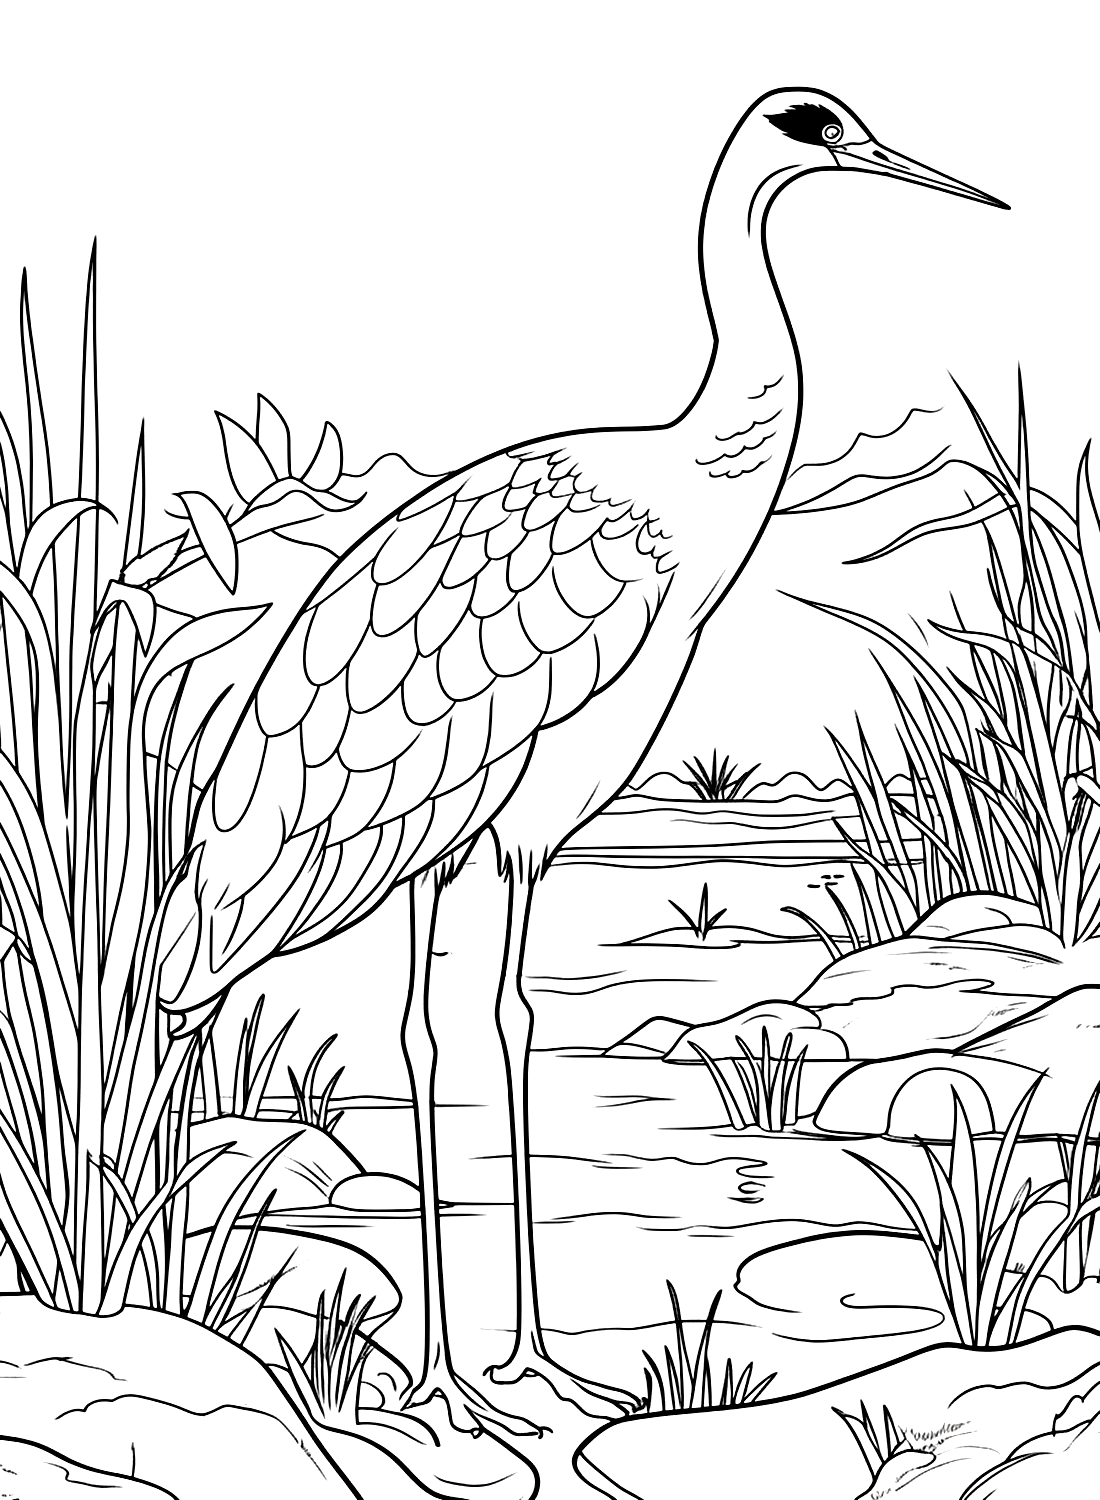 Crane Bird Standing Coloring Page - Free Printable Coloring Pages